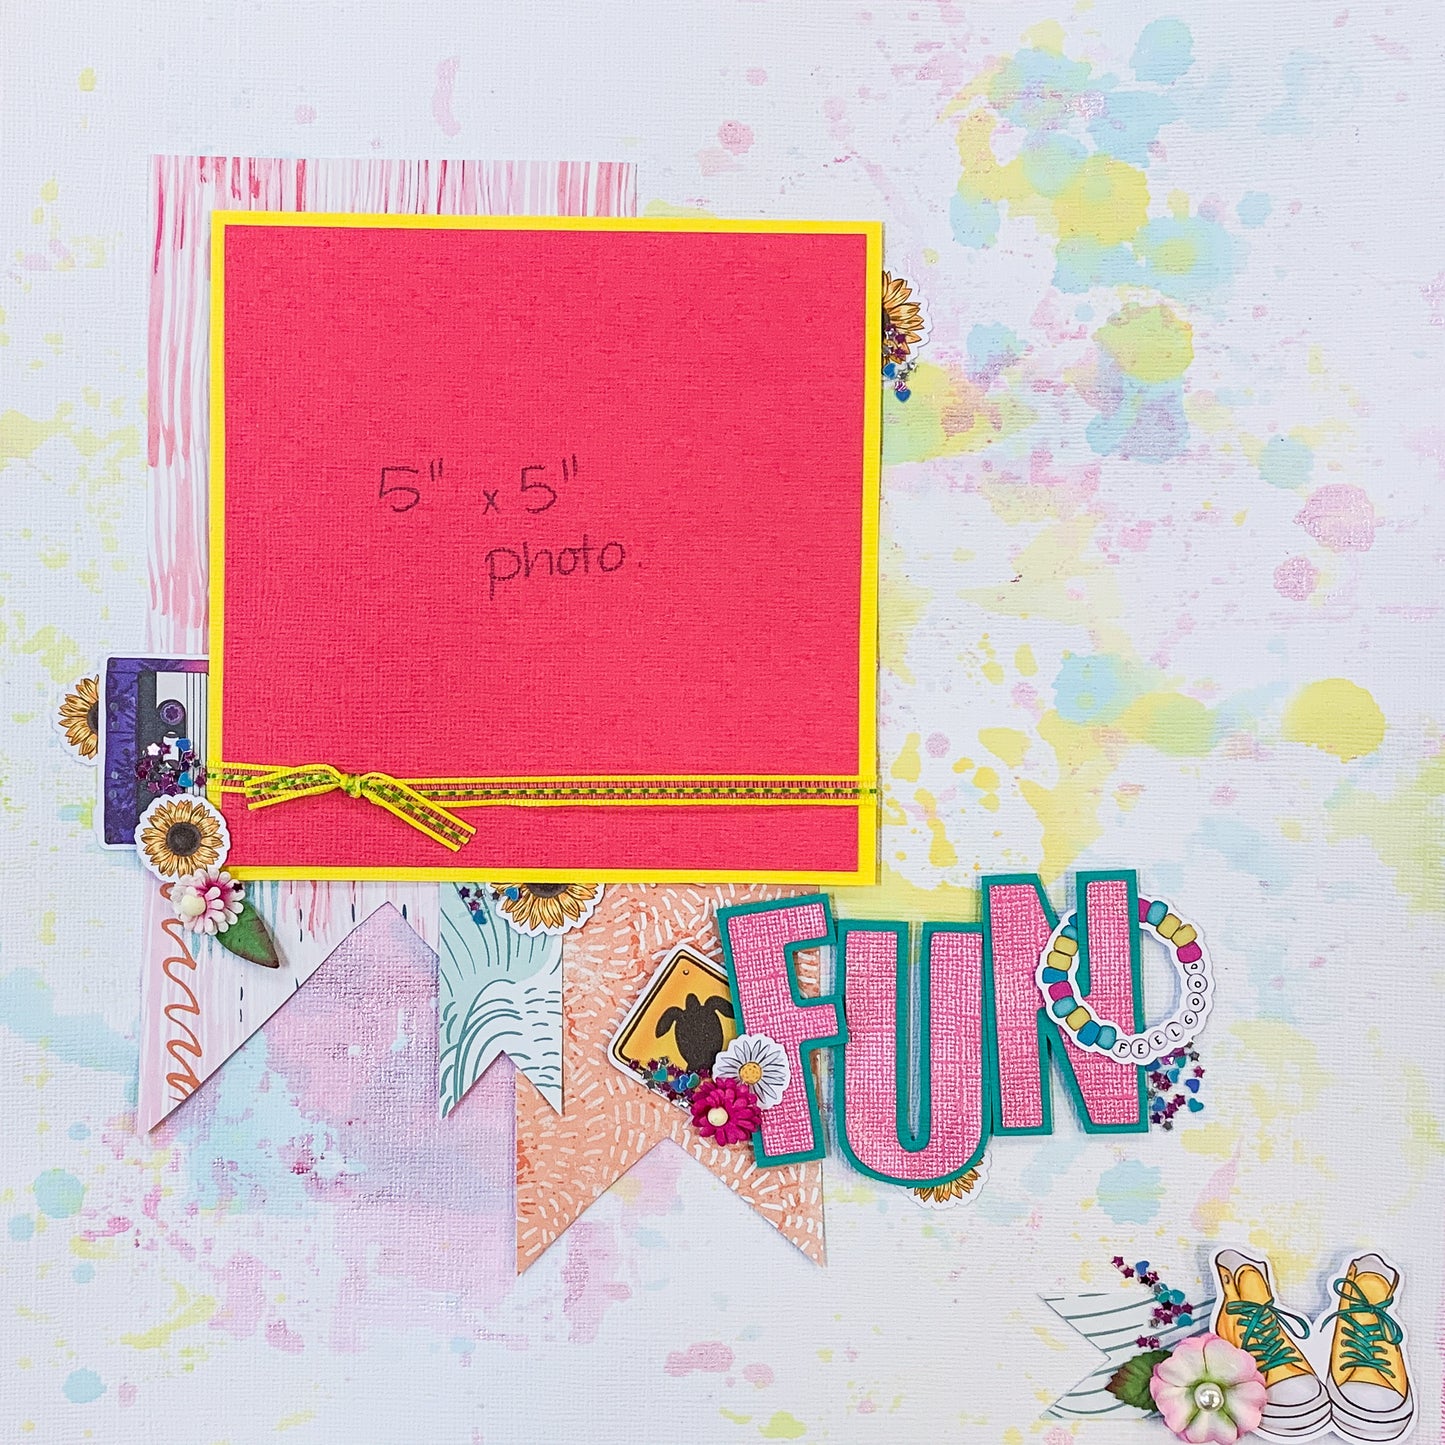 Summer Fun 6"x3.5" White Linen Cardstock Title-Cut - Designed by Alicia Redshaw